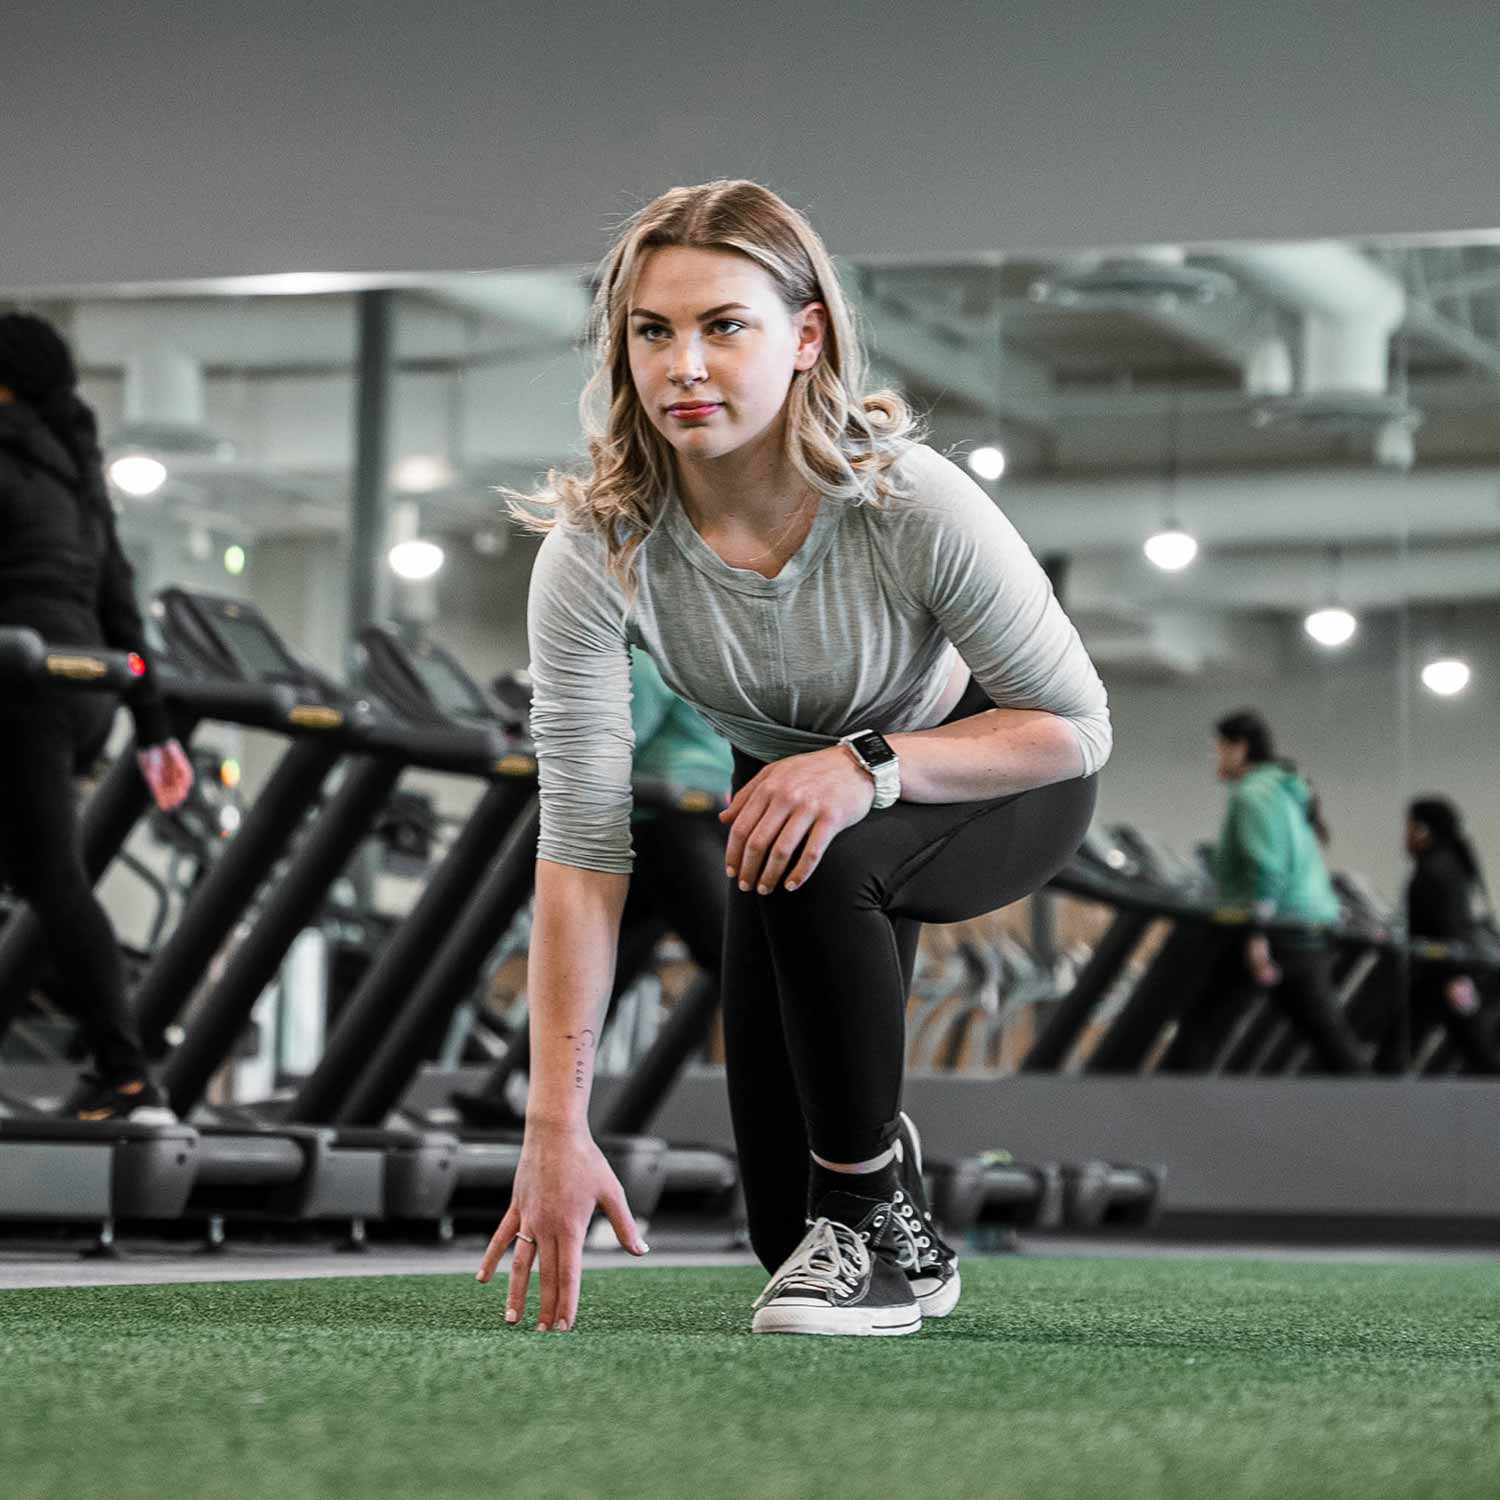 Woman in running position at the gym in Calgary